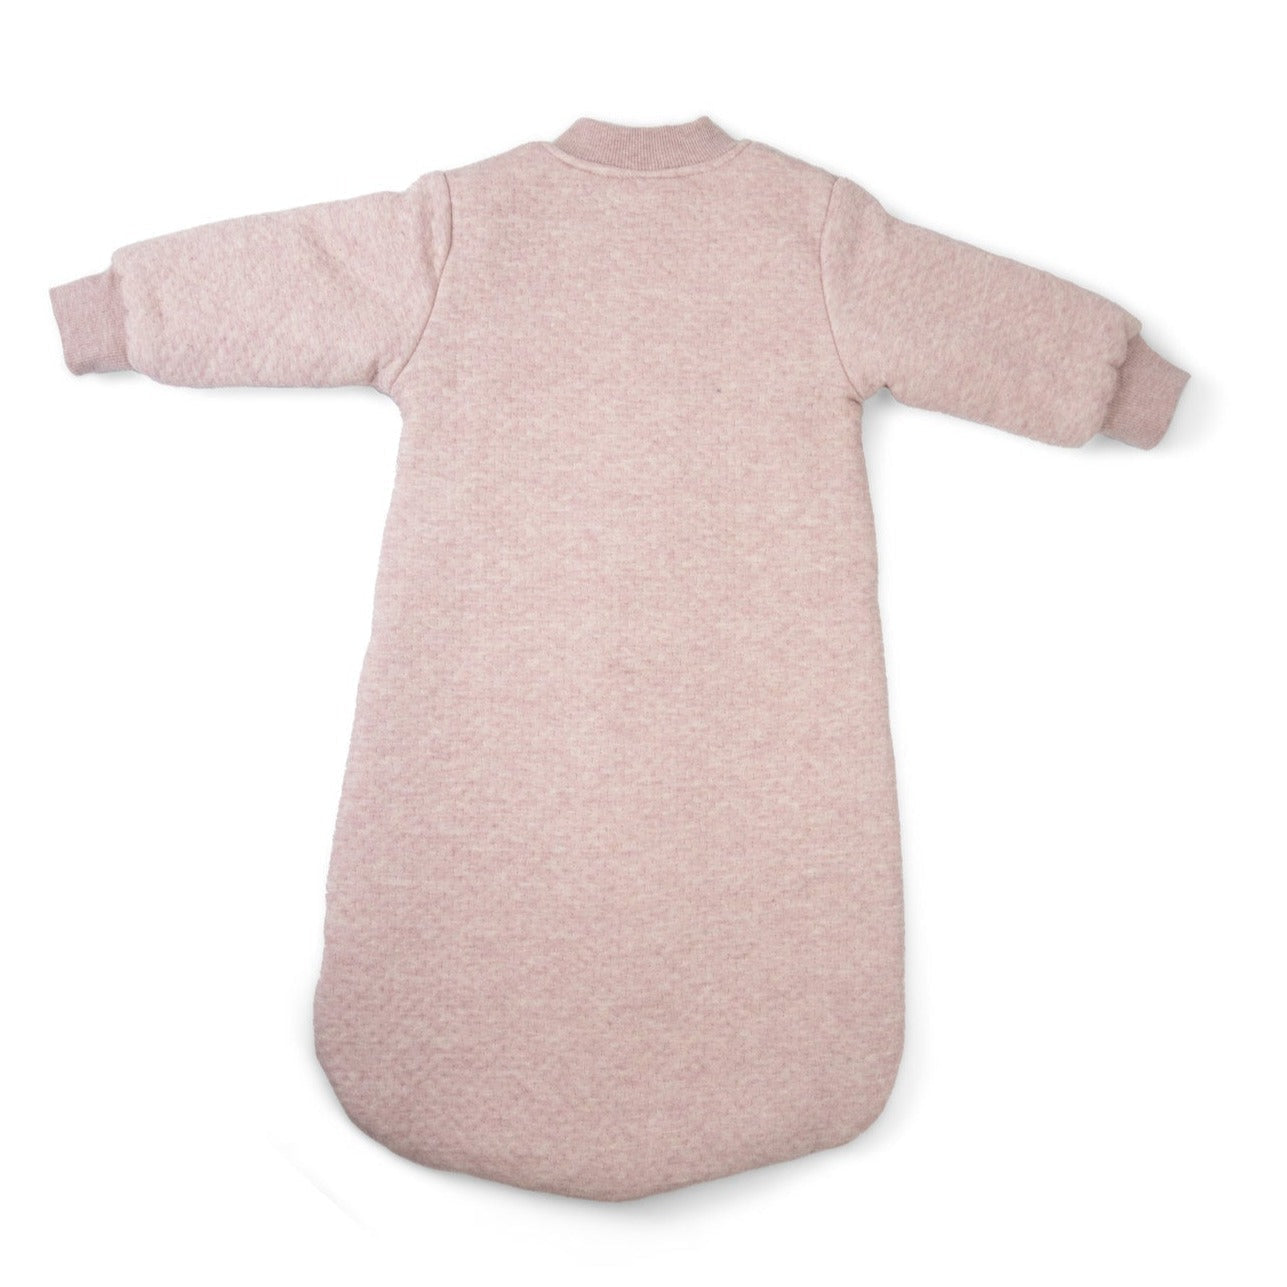 Dusty Pink Sleeping Bag with Arms 3.0TOG (6-18 Months) | babystudio